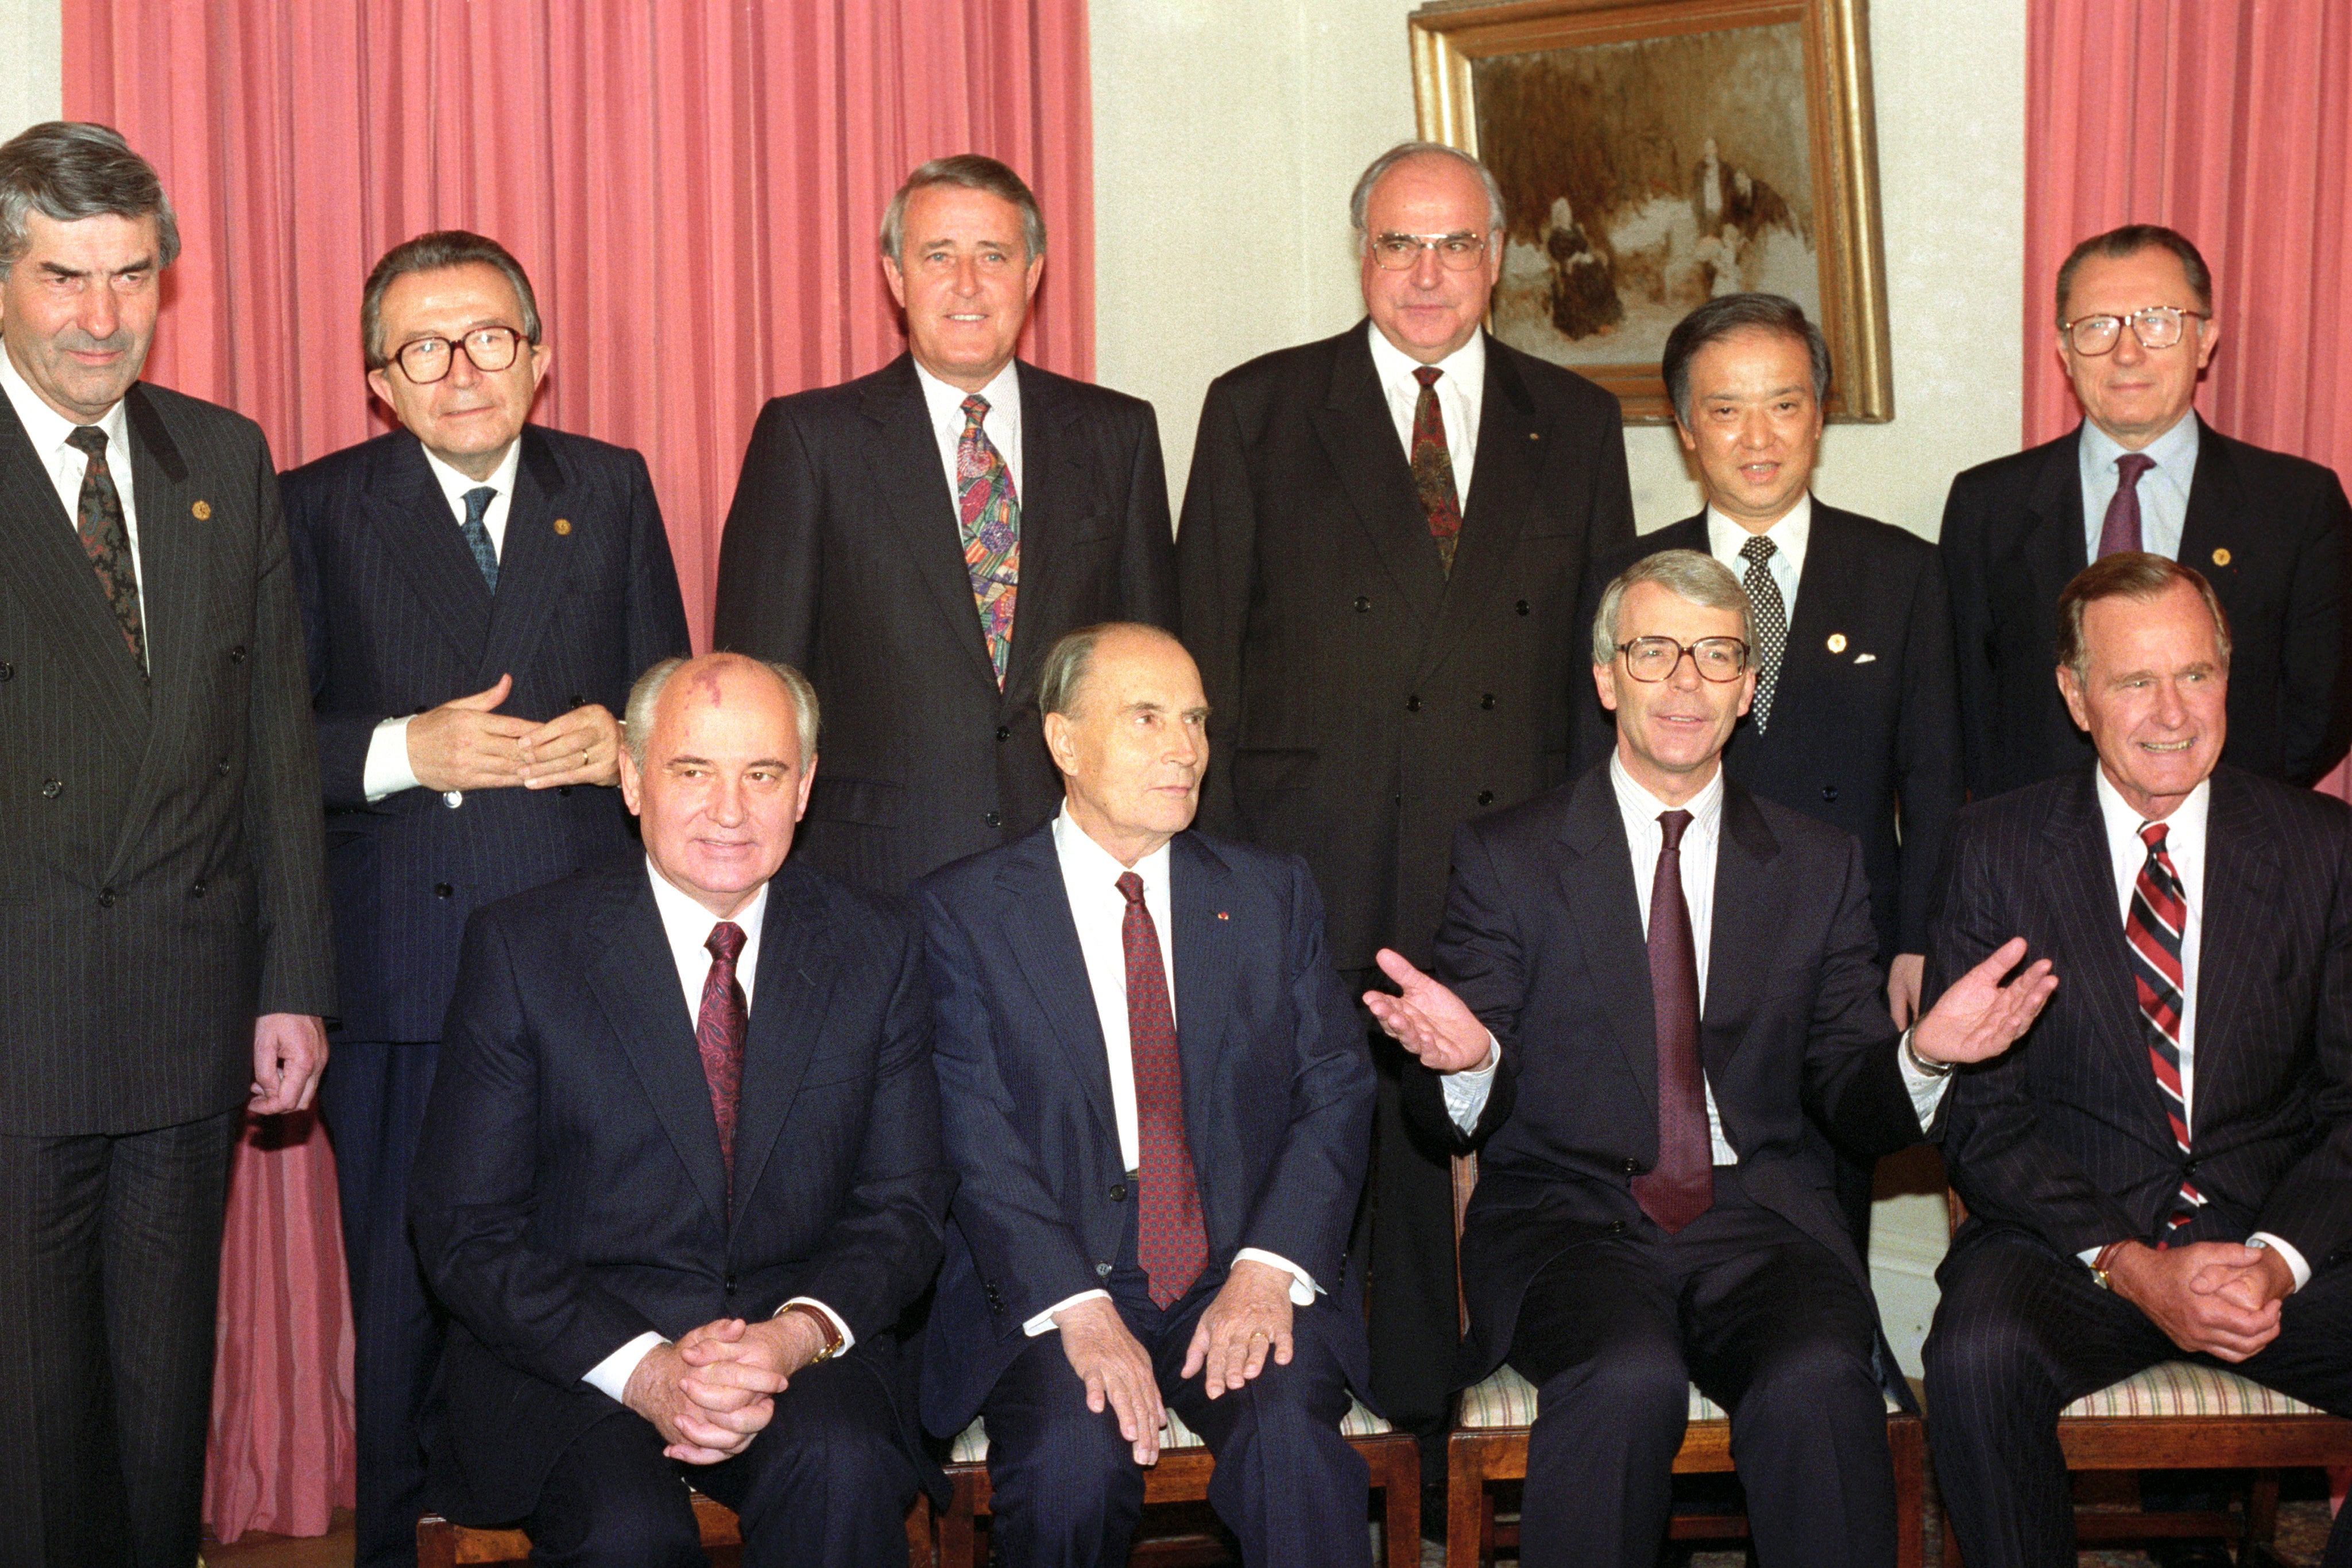 The G7 leaders pose for a photograph inside 10 Downing Street. Back row (l-r): Ruud Lubbers, Giulio Andreotti, Brian Mulroney, Helmut Kohl, Toshiki Kaifu and Jacques Delors. Front: Mikhail Gorbachev, Francois Mitterrand, John Major and George Bush (Rebecca Naden/PA)